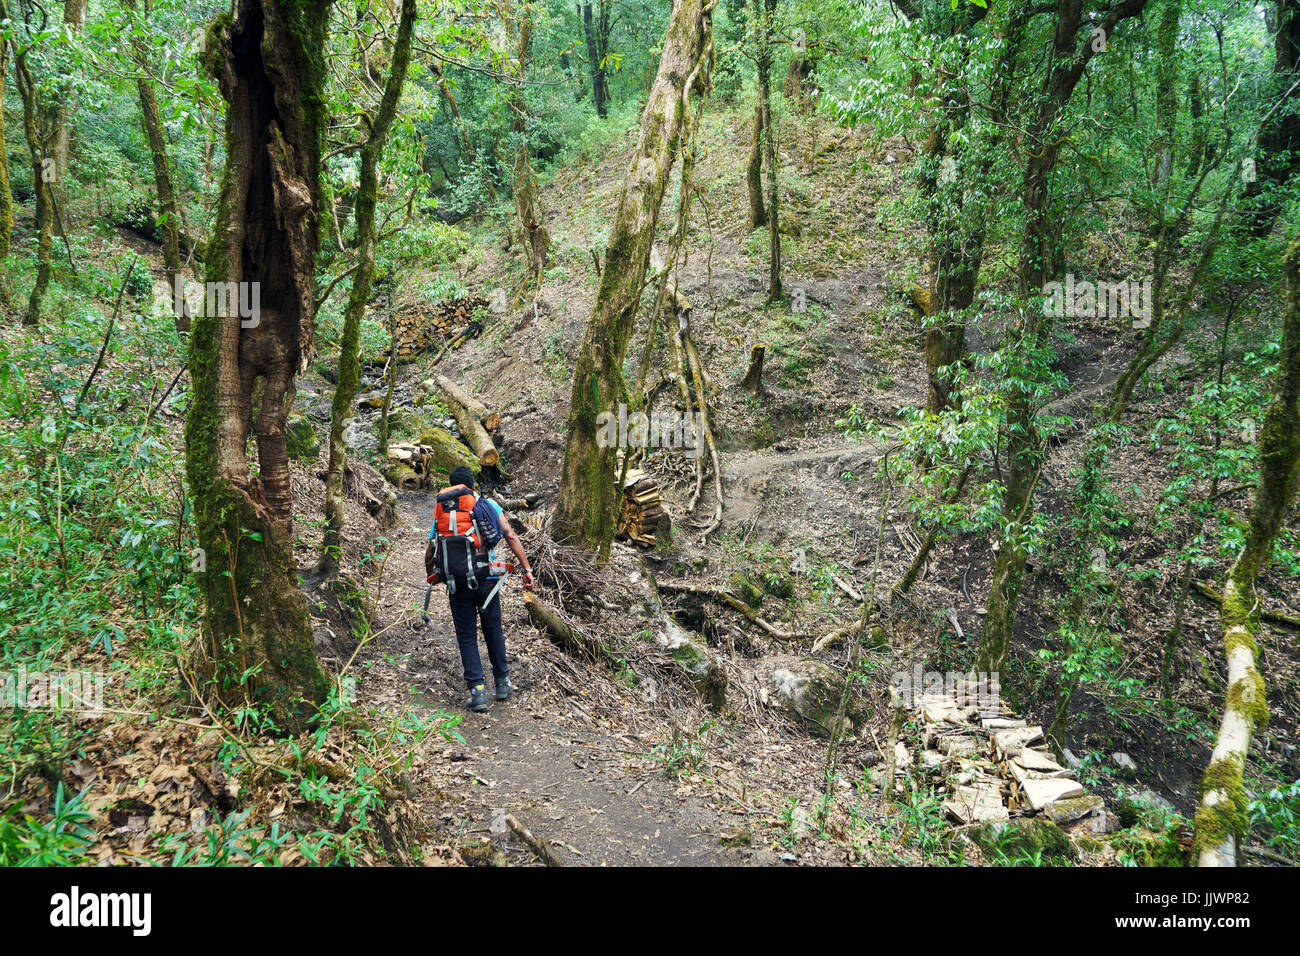 Trekker on a forest trail part of the Annapurna circuit, Nepal. Stock Photo